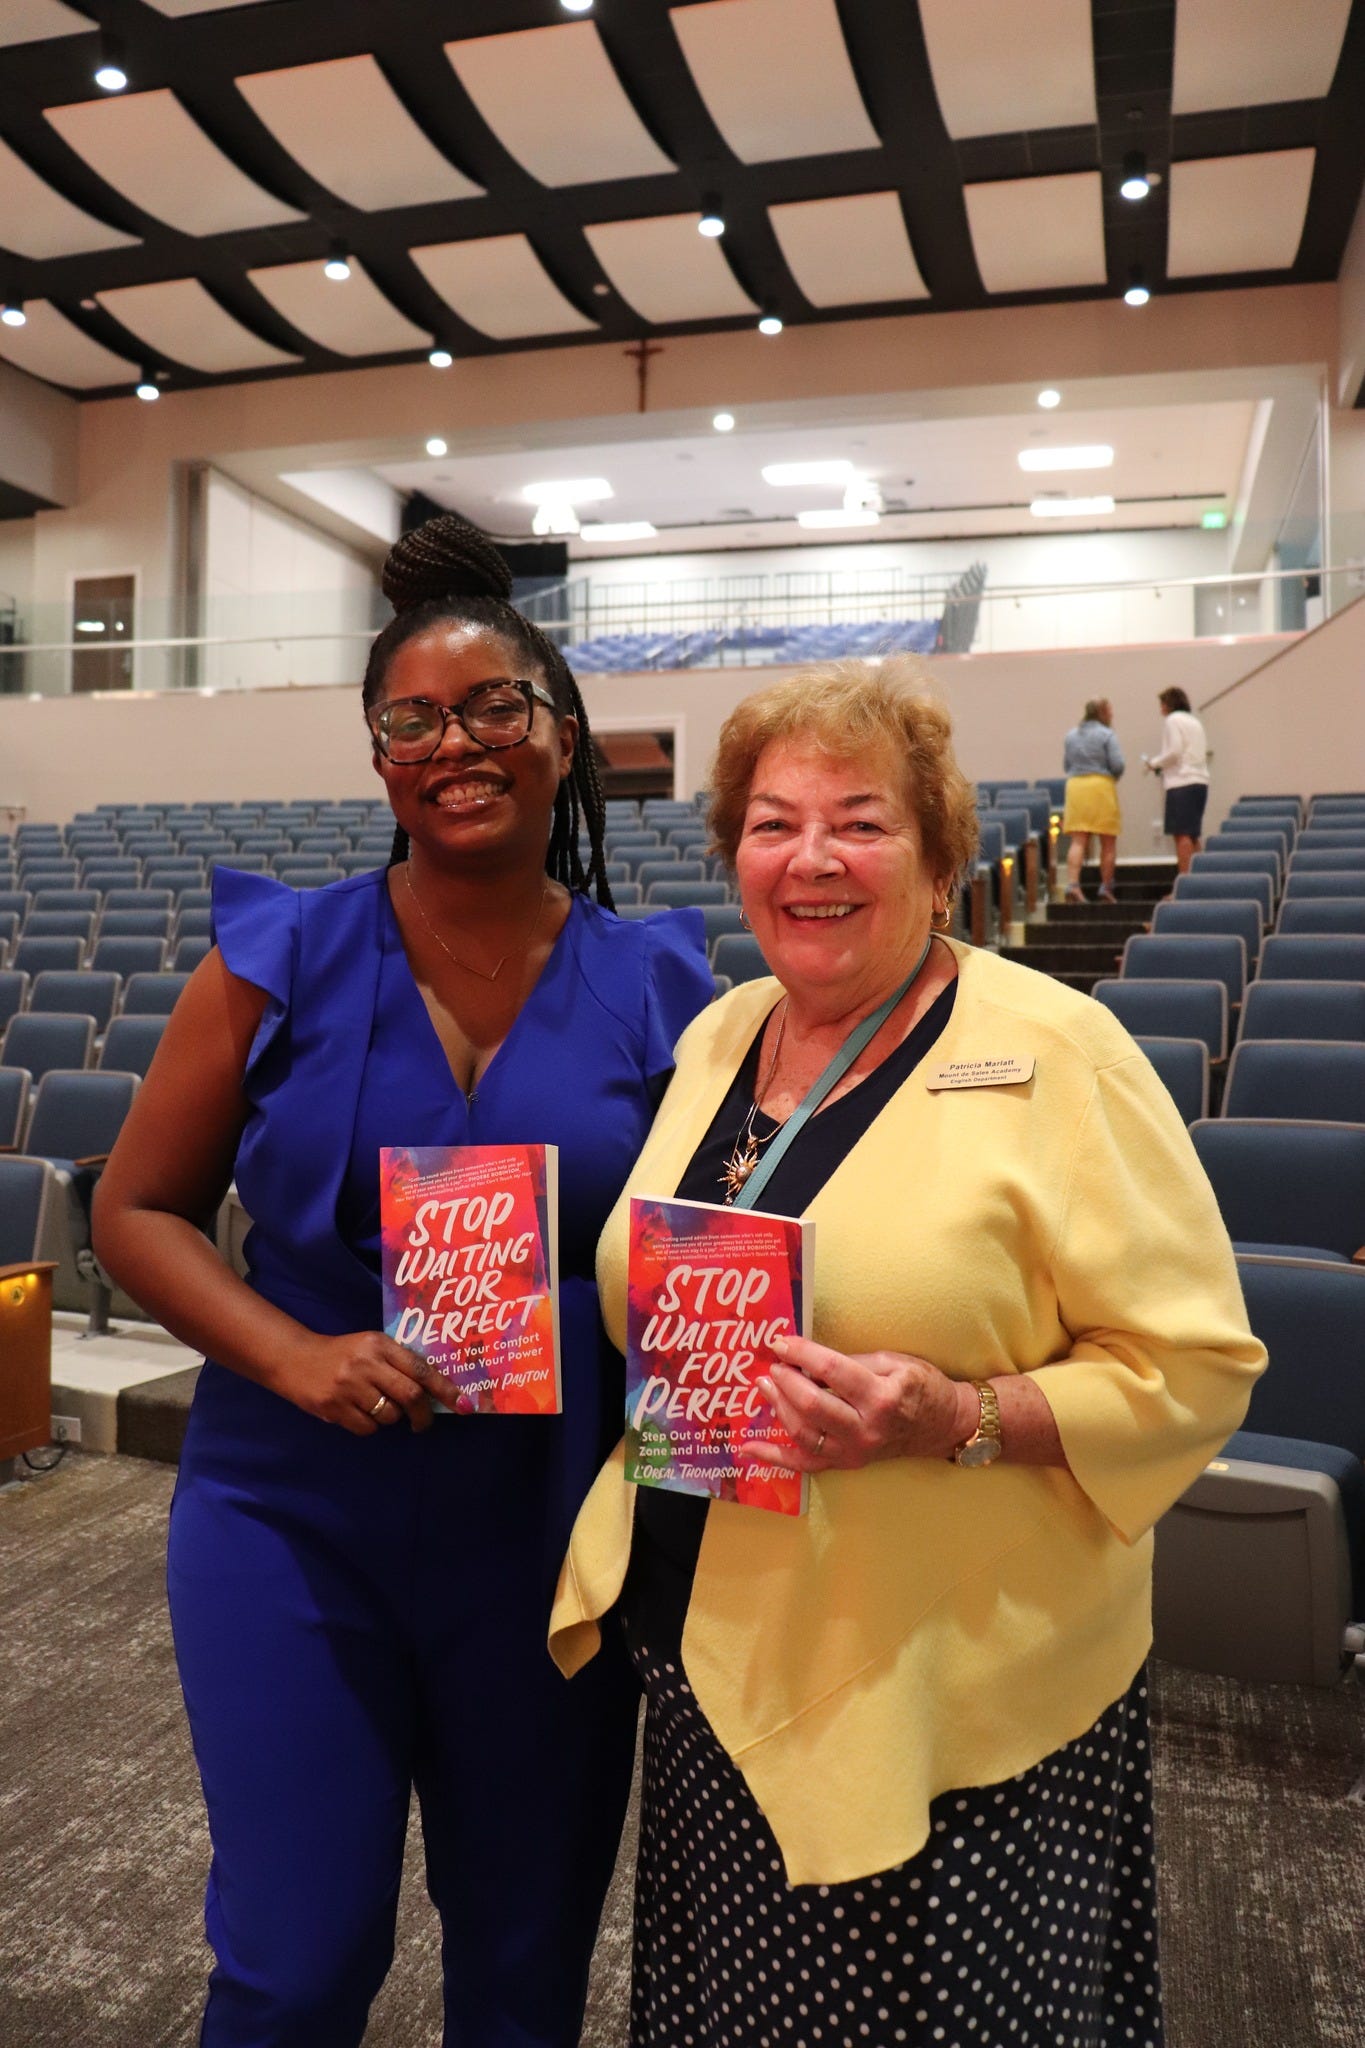 Picture of a Black woman wearing a blue jumpsuit standing next to a white woman wearing a yellow cardigan. Both are holding books in their hands.